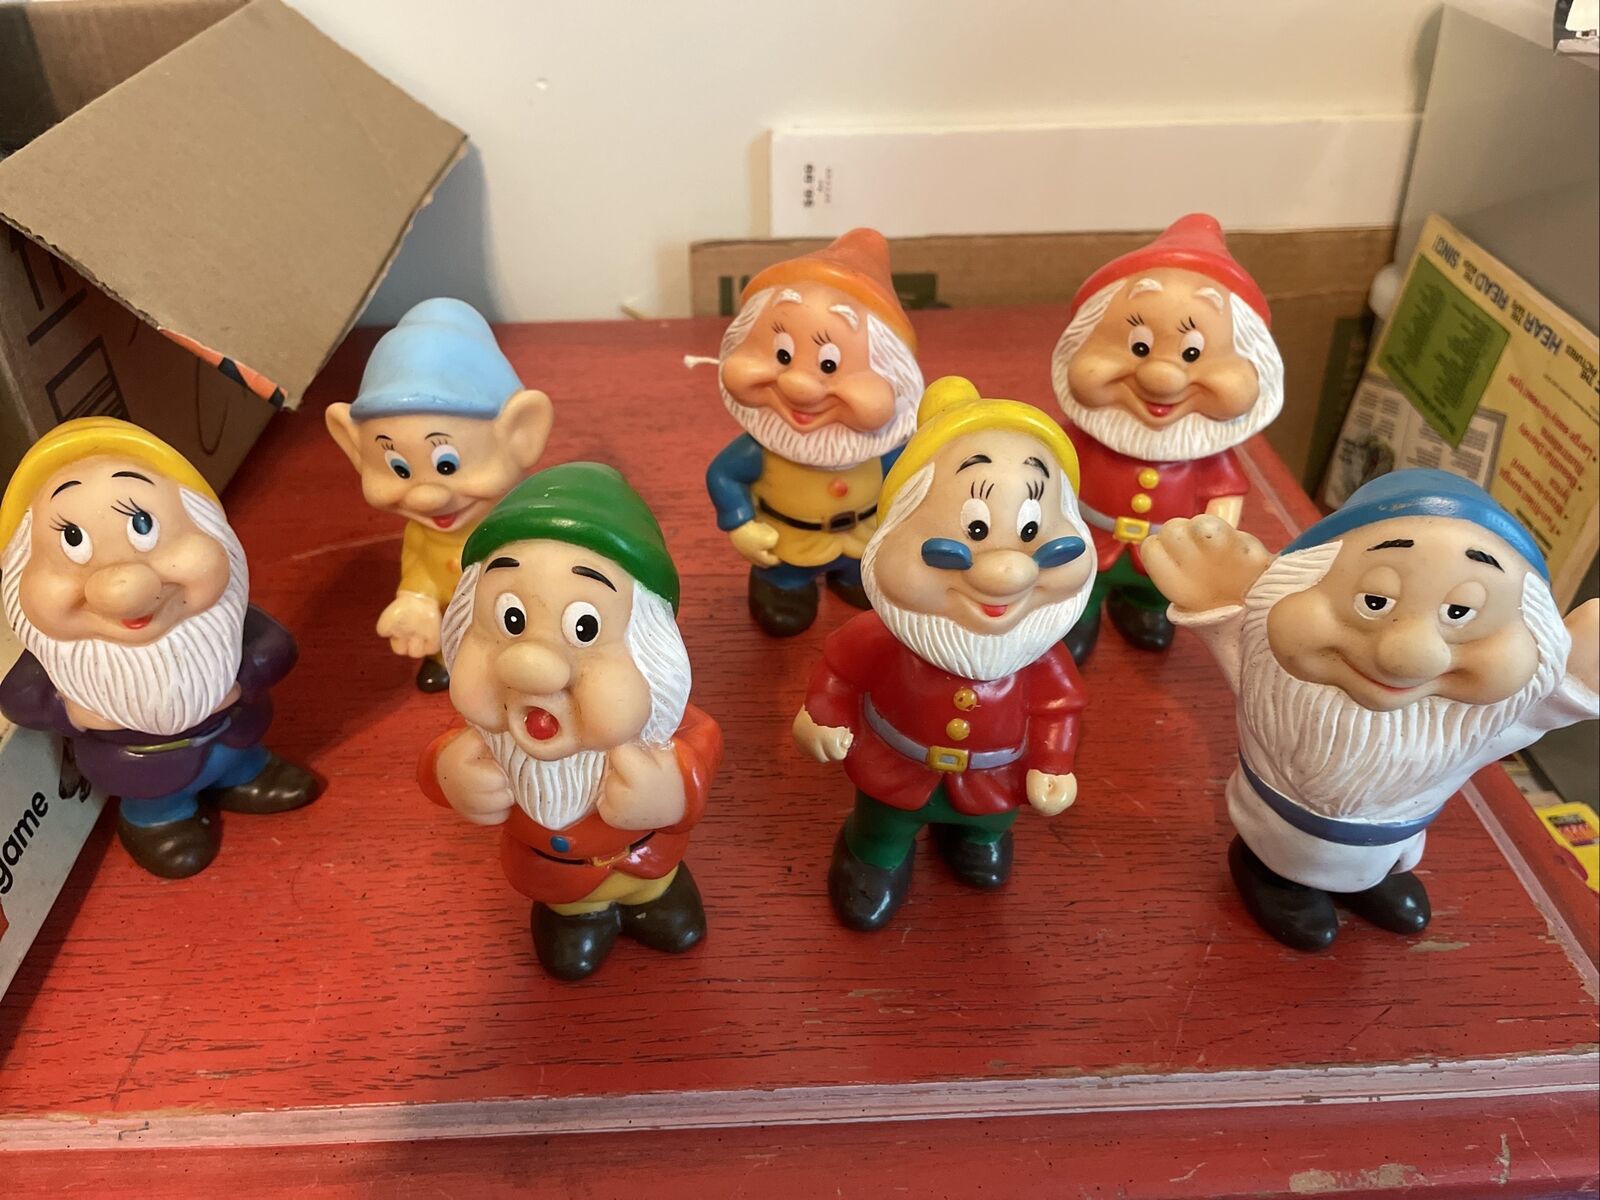 Vint. Disney 7 Dwarfs 6Figures Squeeze Rubber Toys 1 Solid Happy From Hong Kong